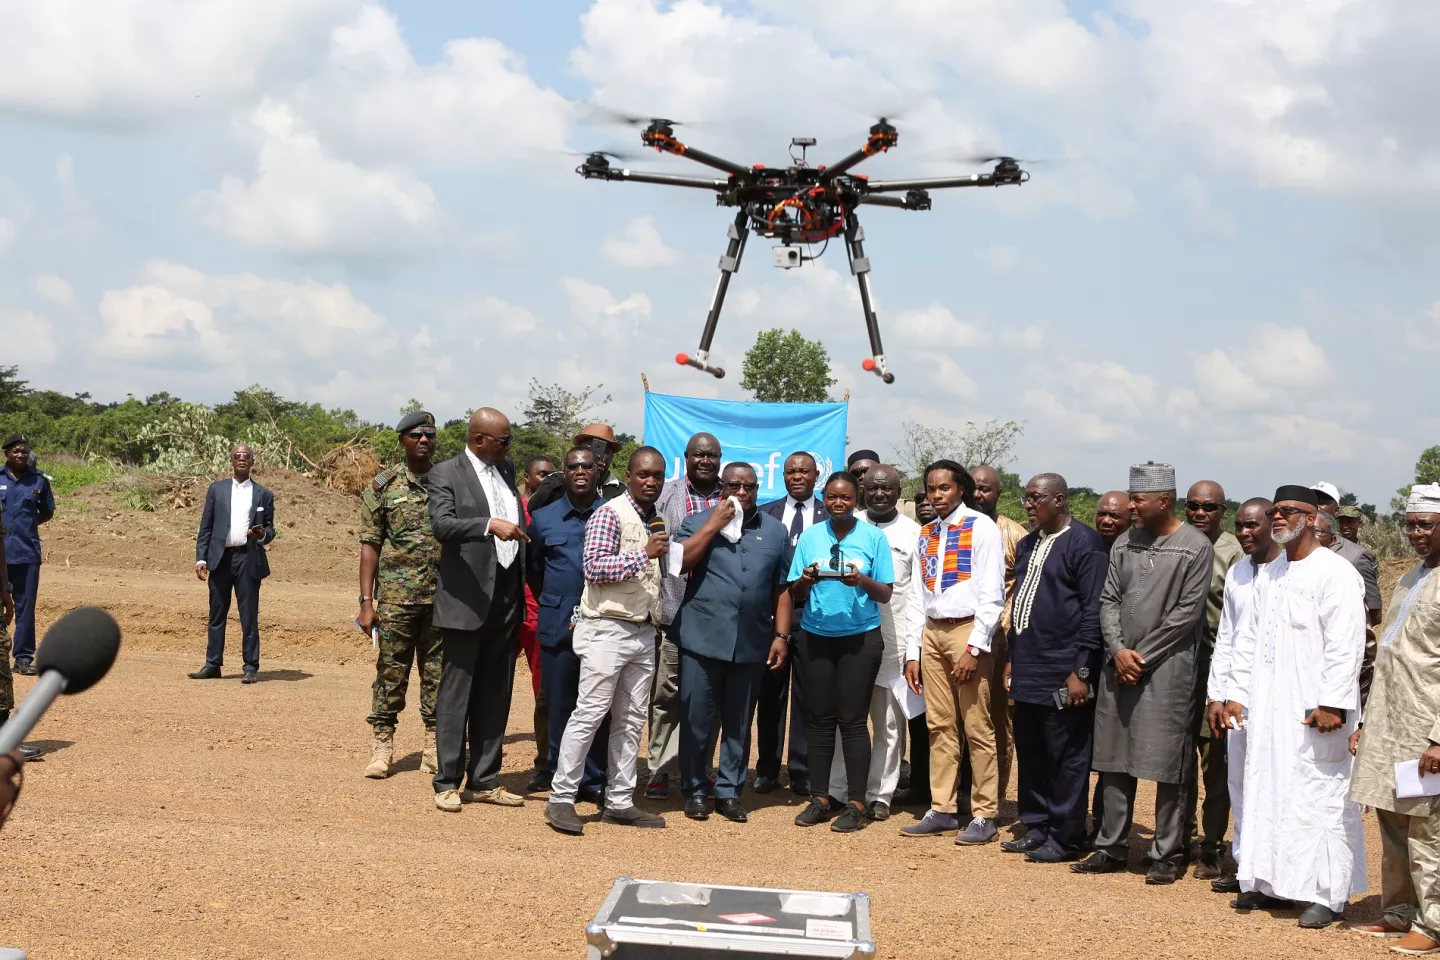 Nigerian creates drone for rural medical deliveries